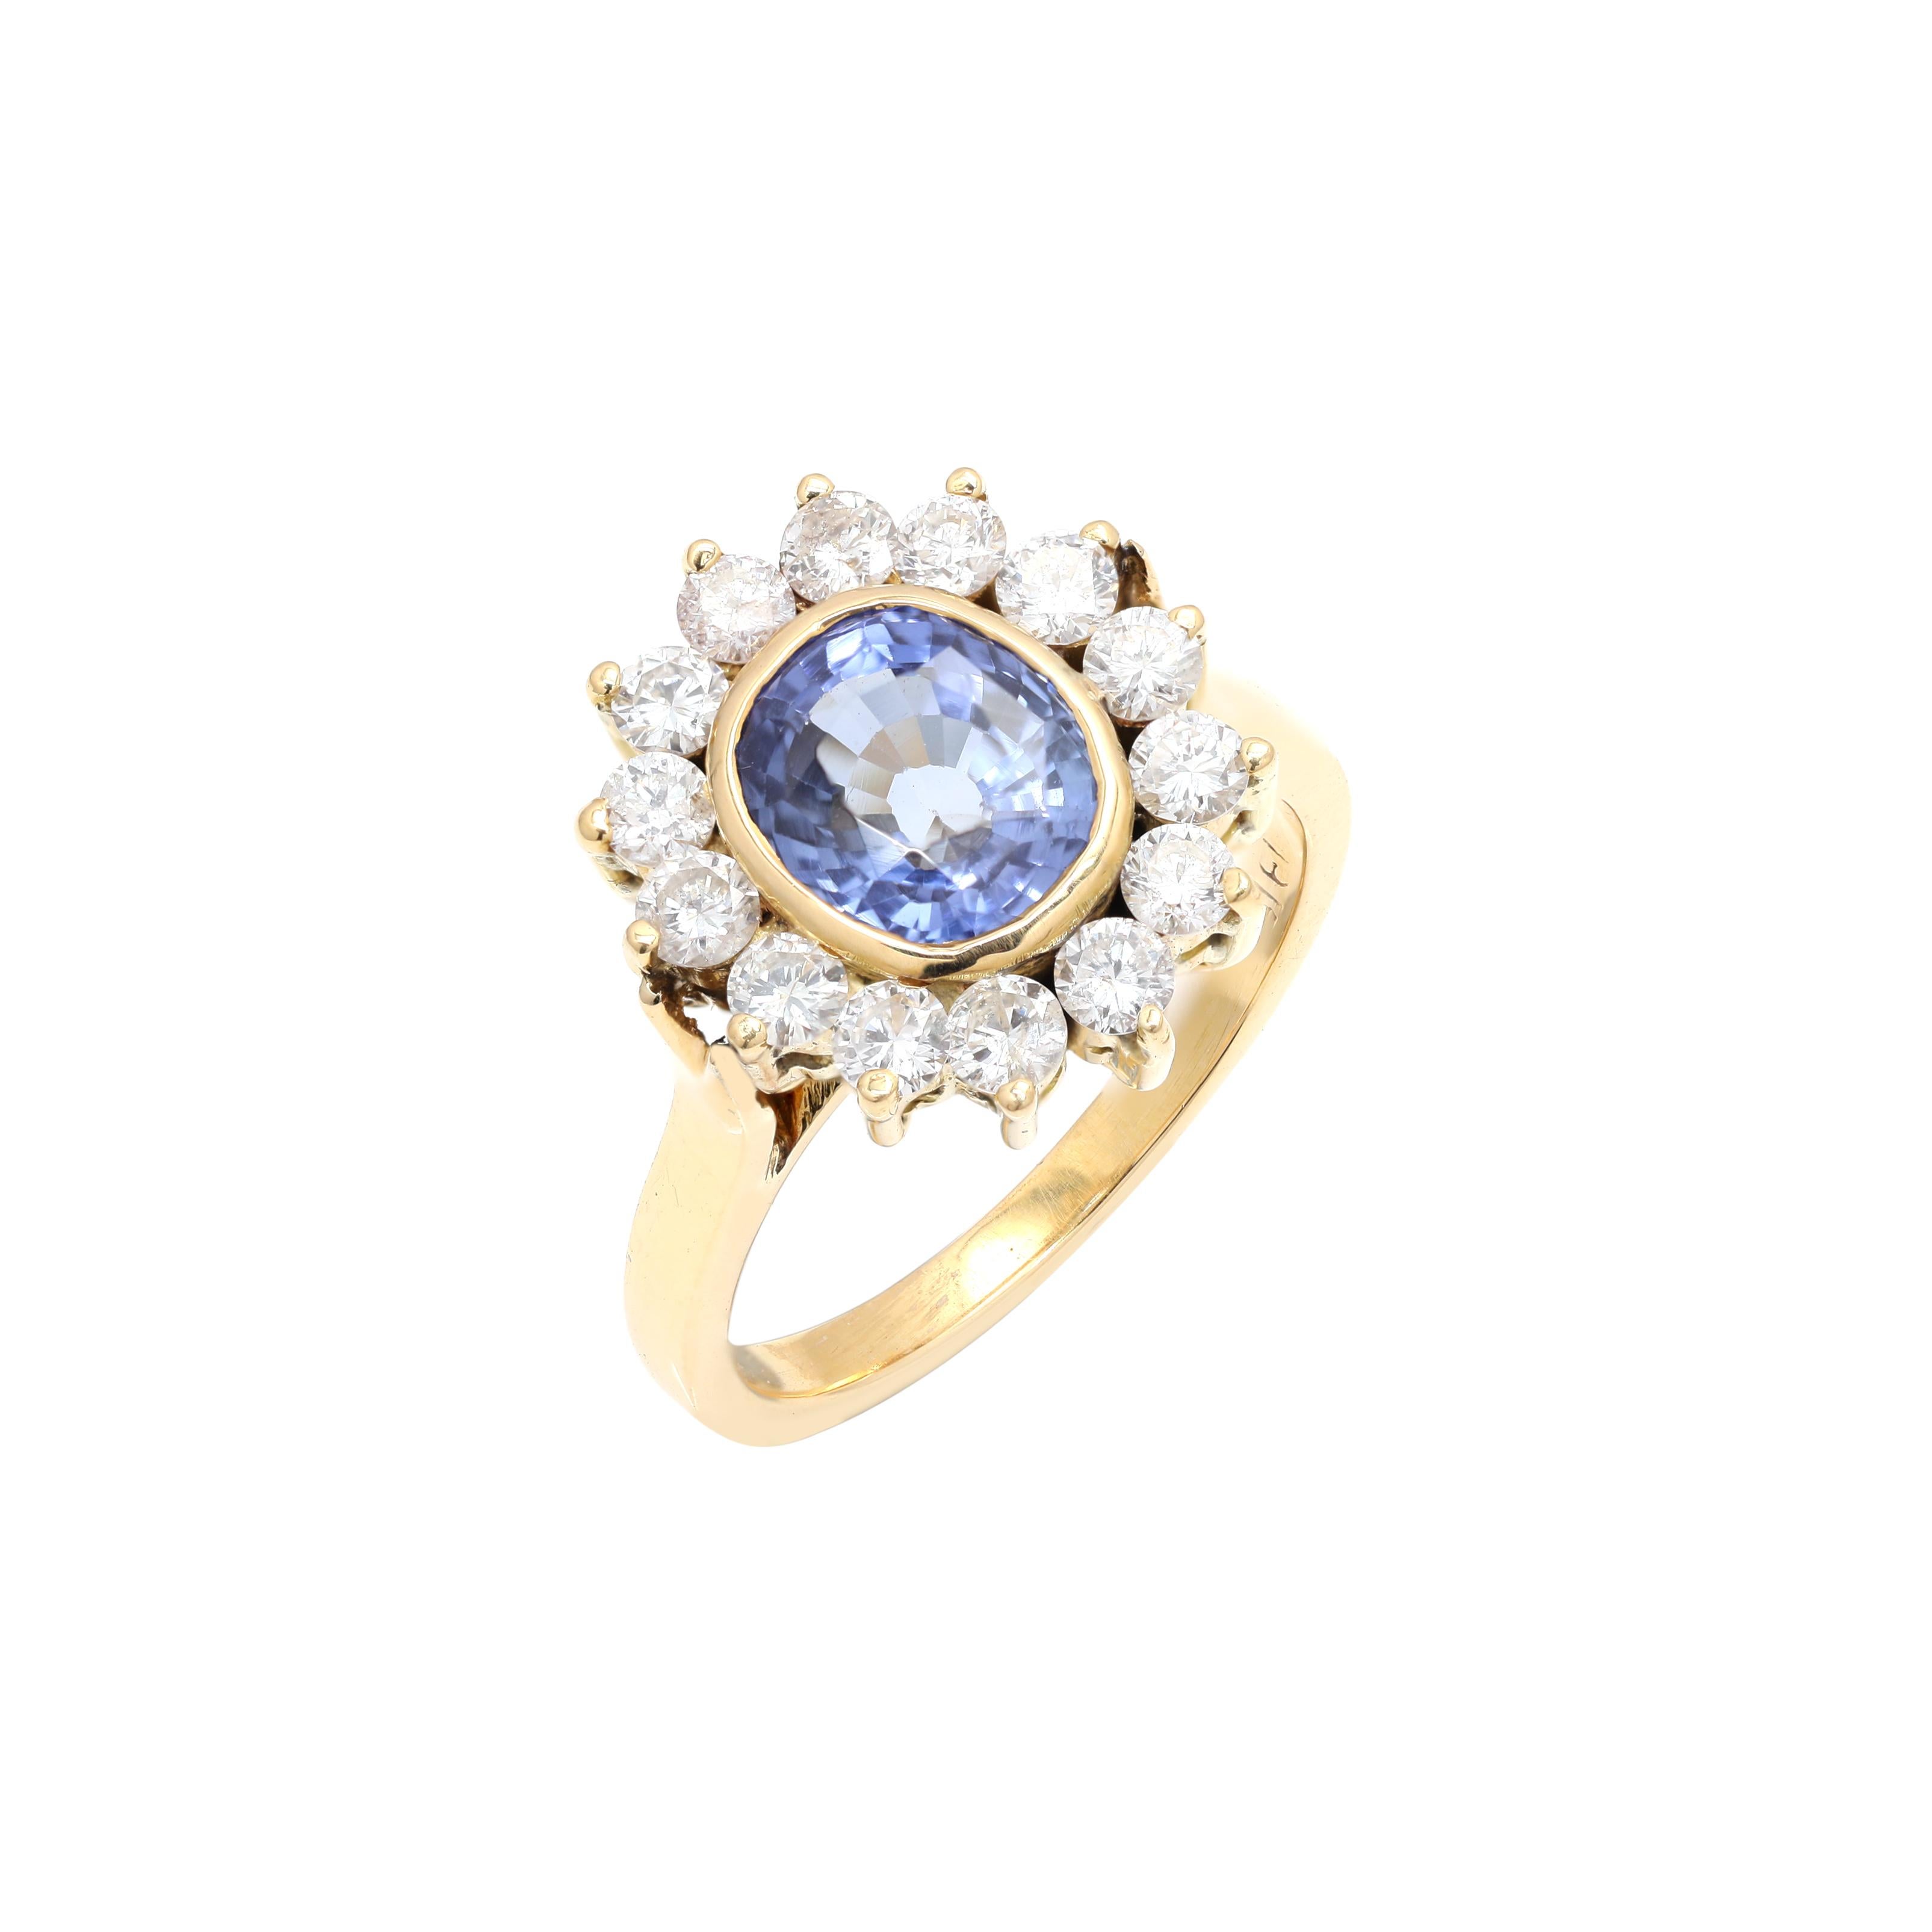 For Sale:  3ct Oval Deep Blue Sapphire Wedding Women Ring with Diamond in 18k Yellow Gold 4